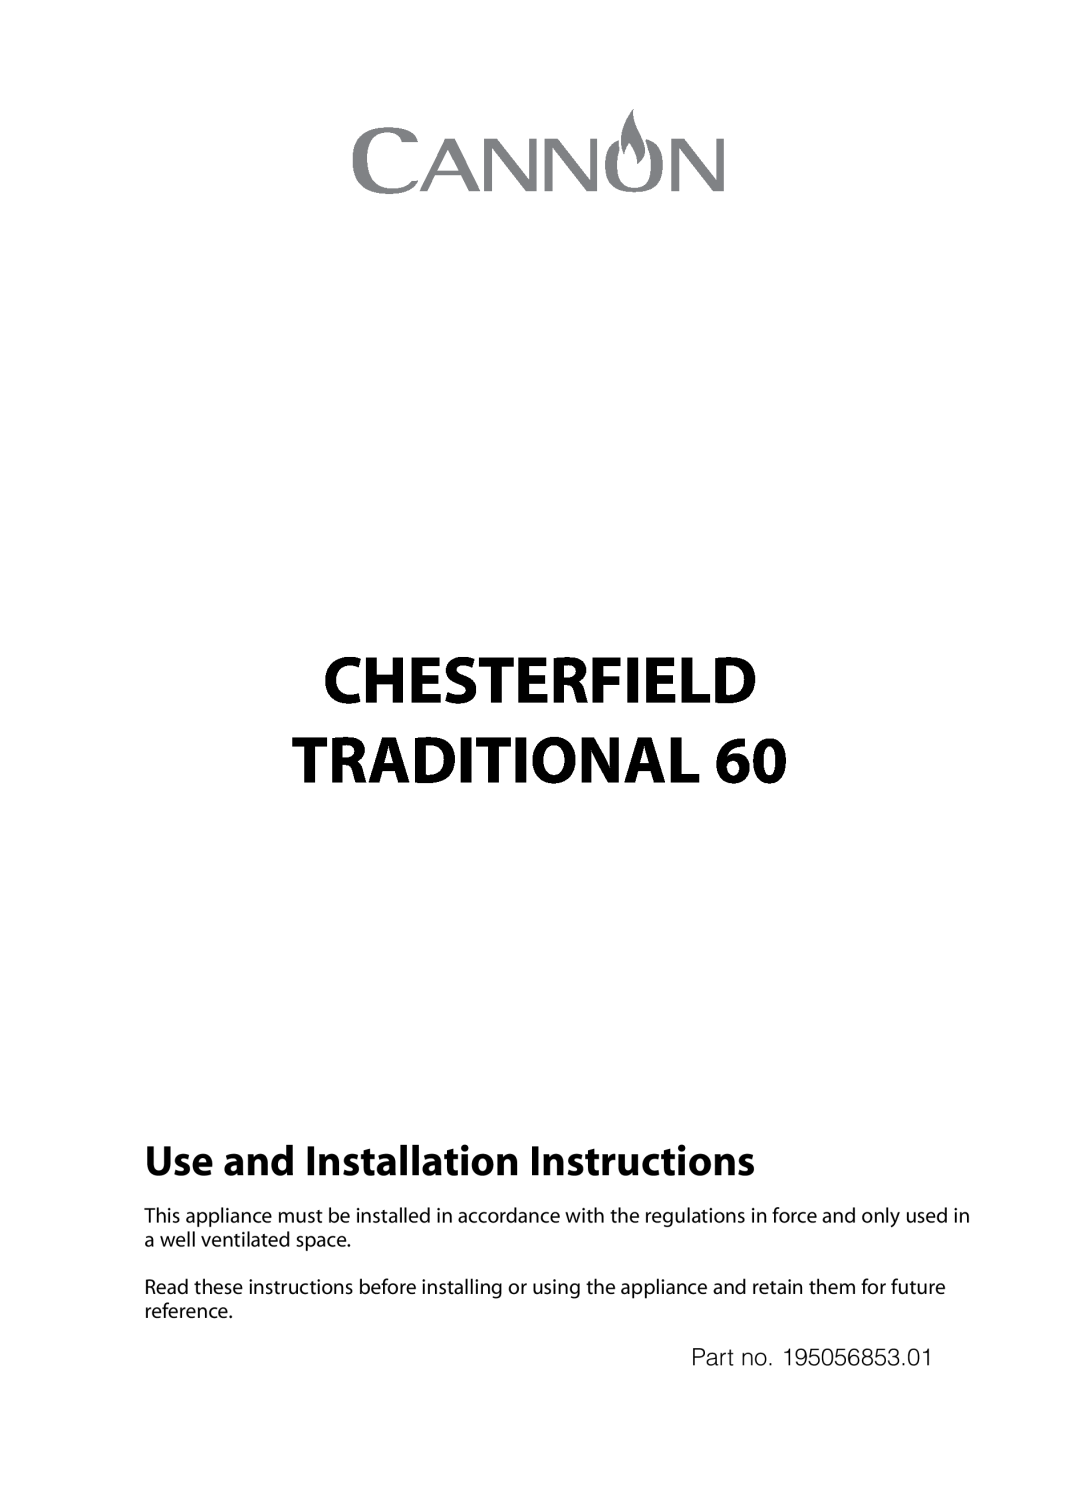 Cannon C60GC, C60GT installation instructions Use and Installation Instructions, Chesterfield Traditional 